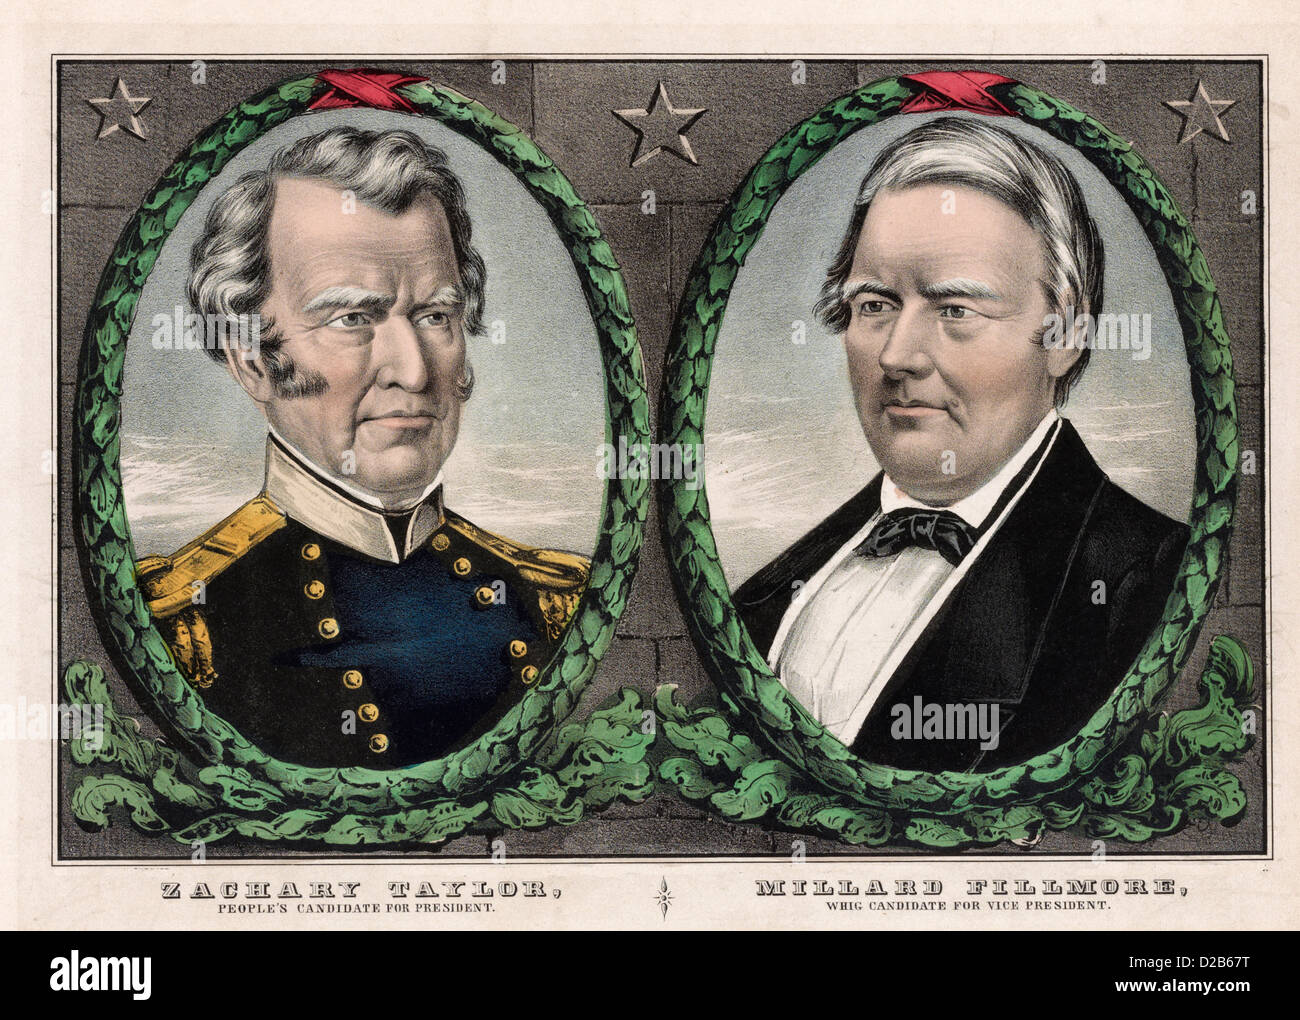 The People's Candidate - Campaign banner for 1848 USA Presidential Election featuring Zachary Taylor and Millard Fillmore Stock Photo